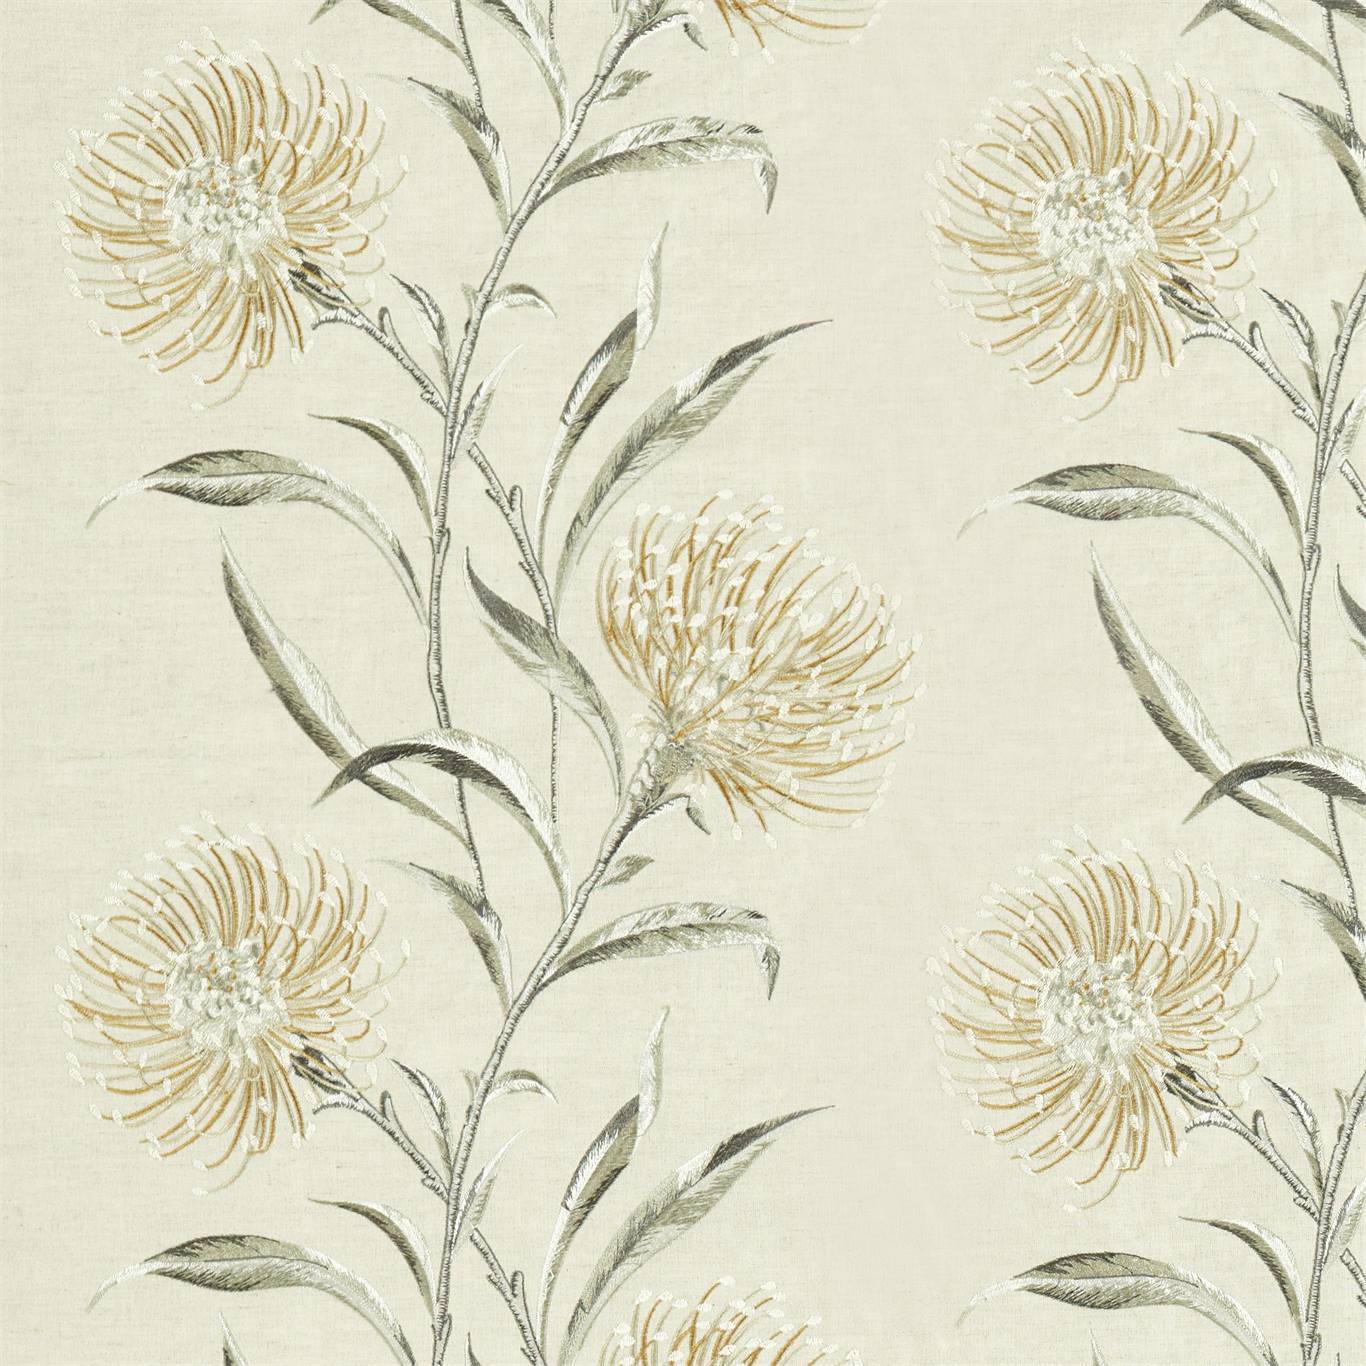 Catherinae Embroidery Hay Fabric by SAN